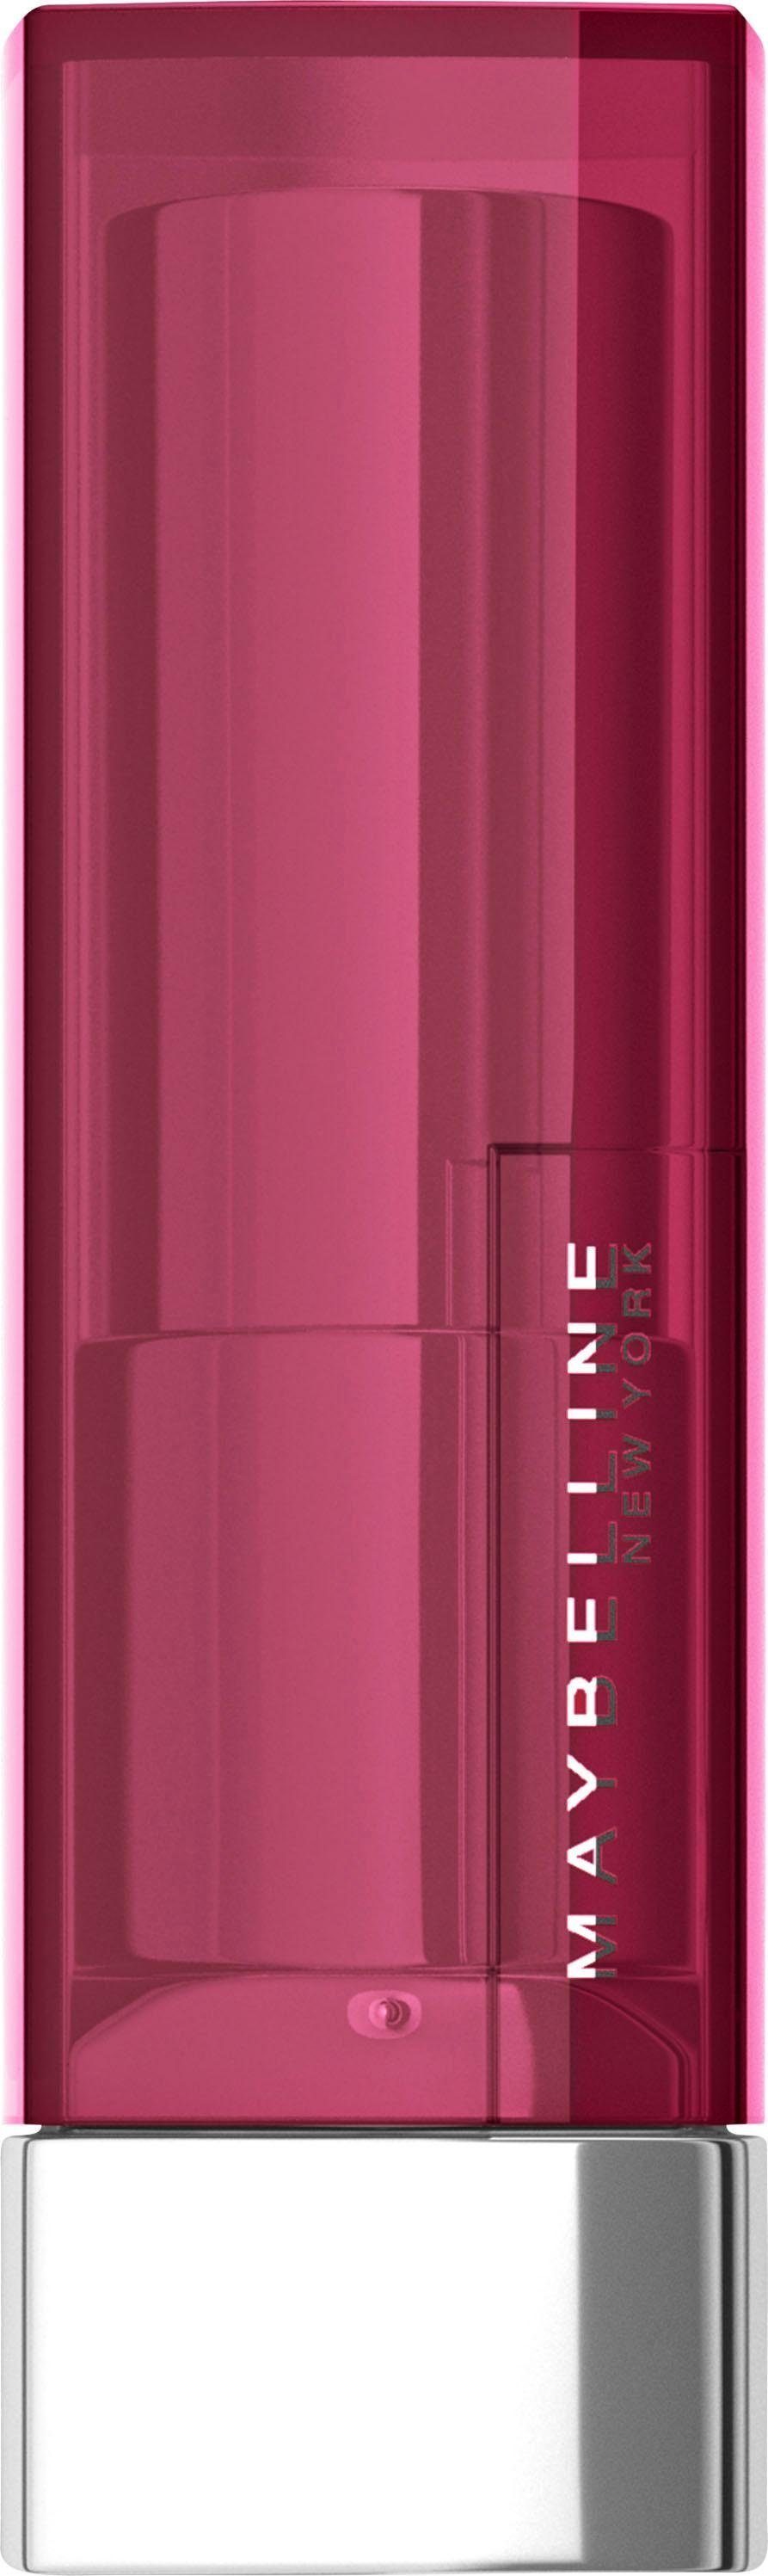 MAYBELLINE stripped NEW Roses rose Color YORK Sensational 300 Lippenstift Smoked